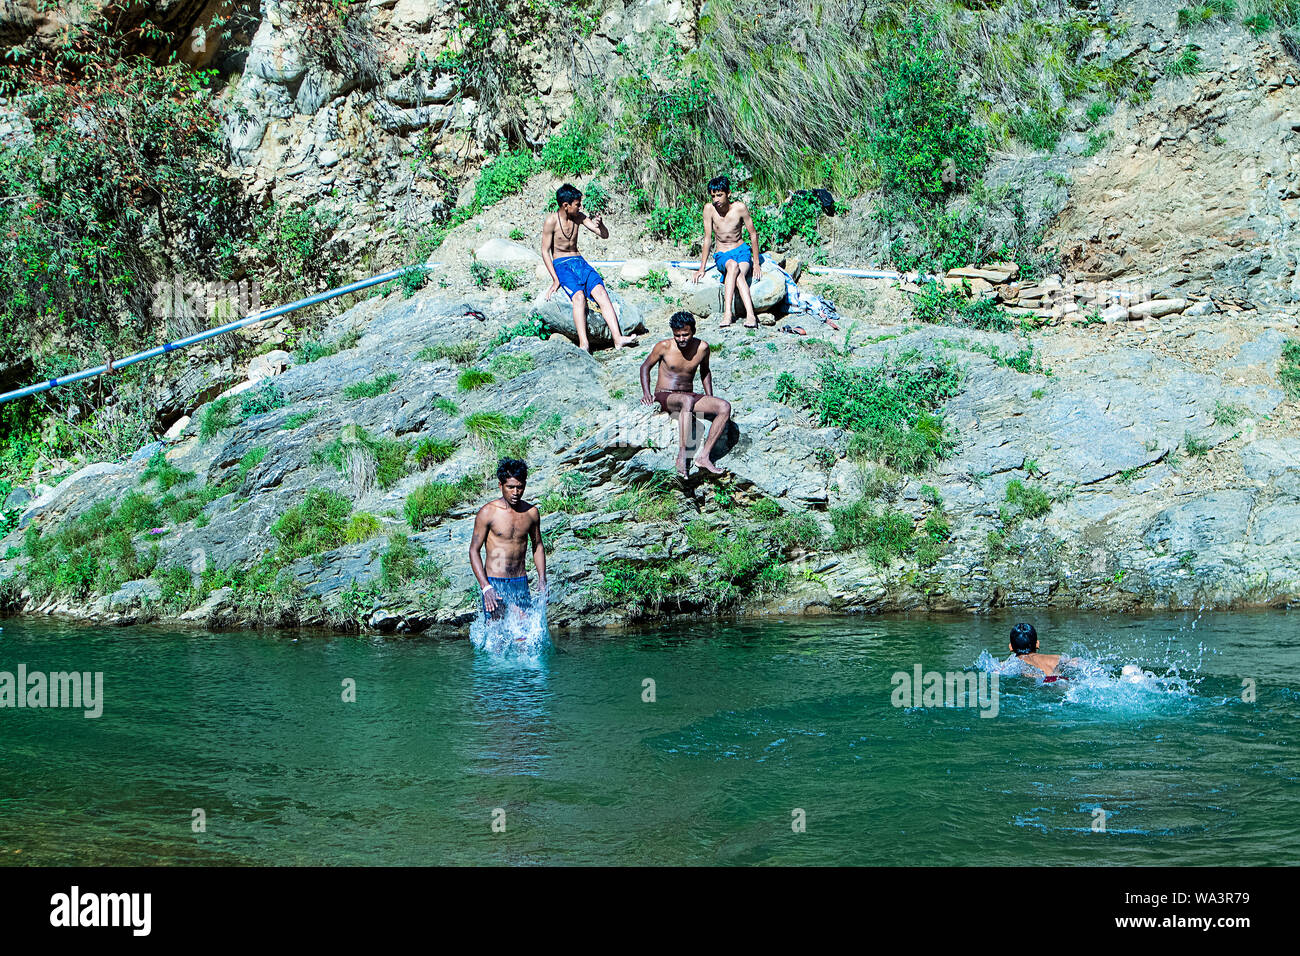 Nehrwa, Himachal Pradesh, india - April 20th, 2019: Boys swimming in fresh river water on a summer vacations Stock Photo